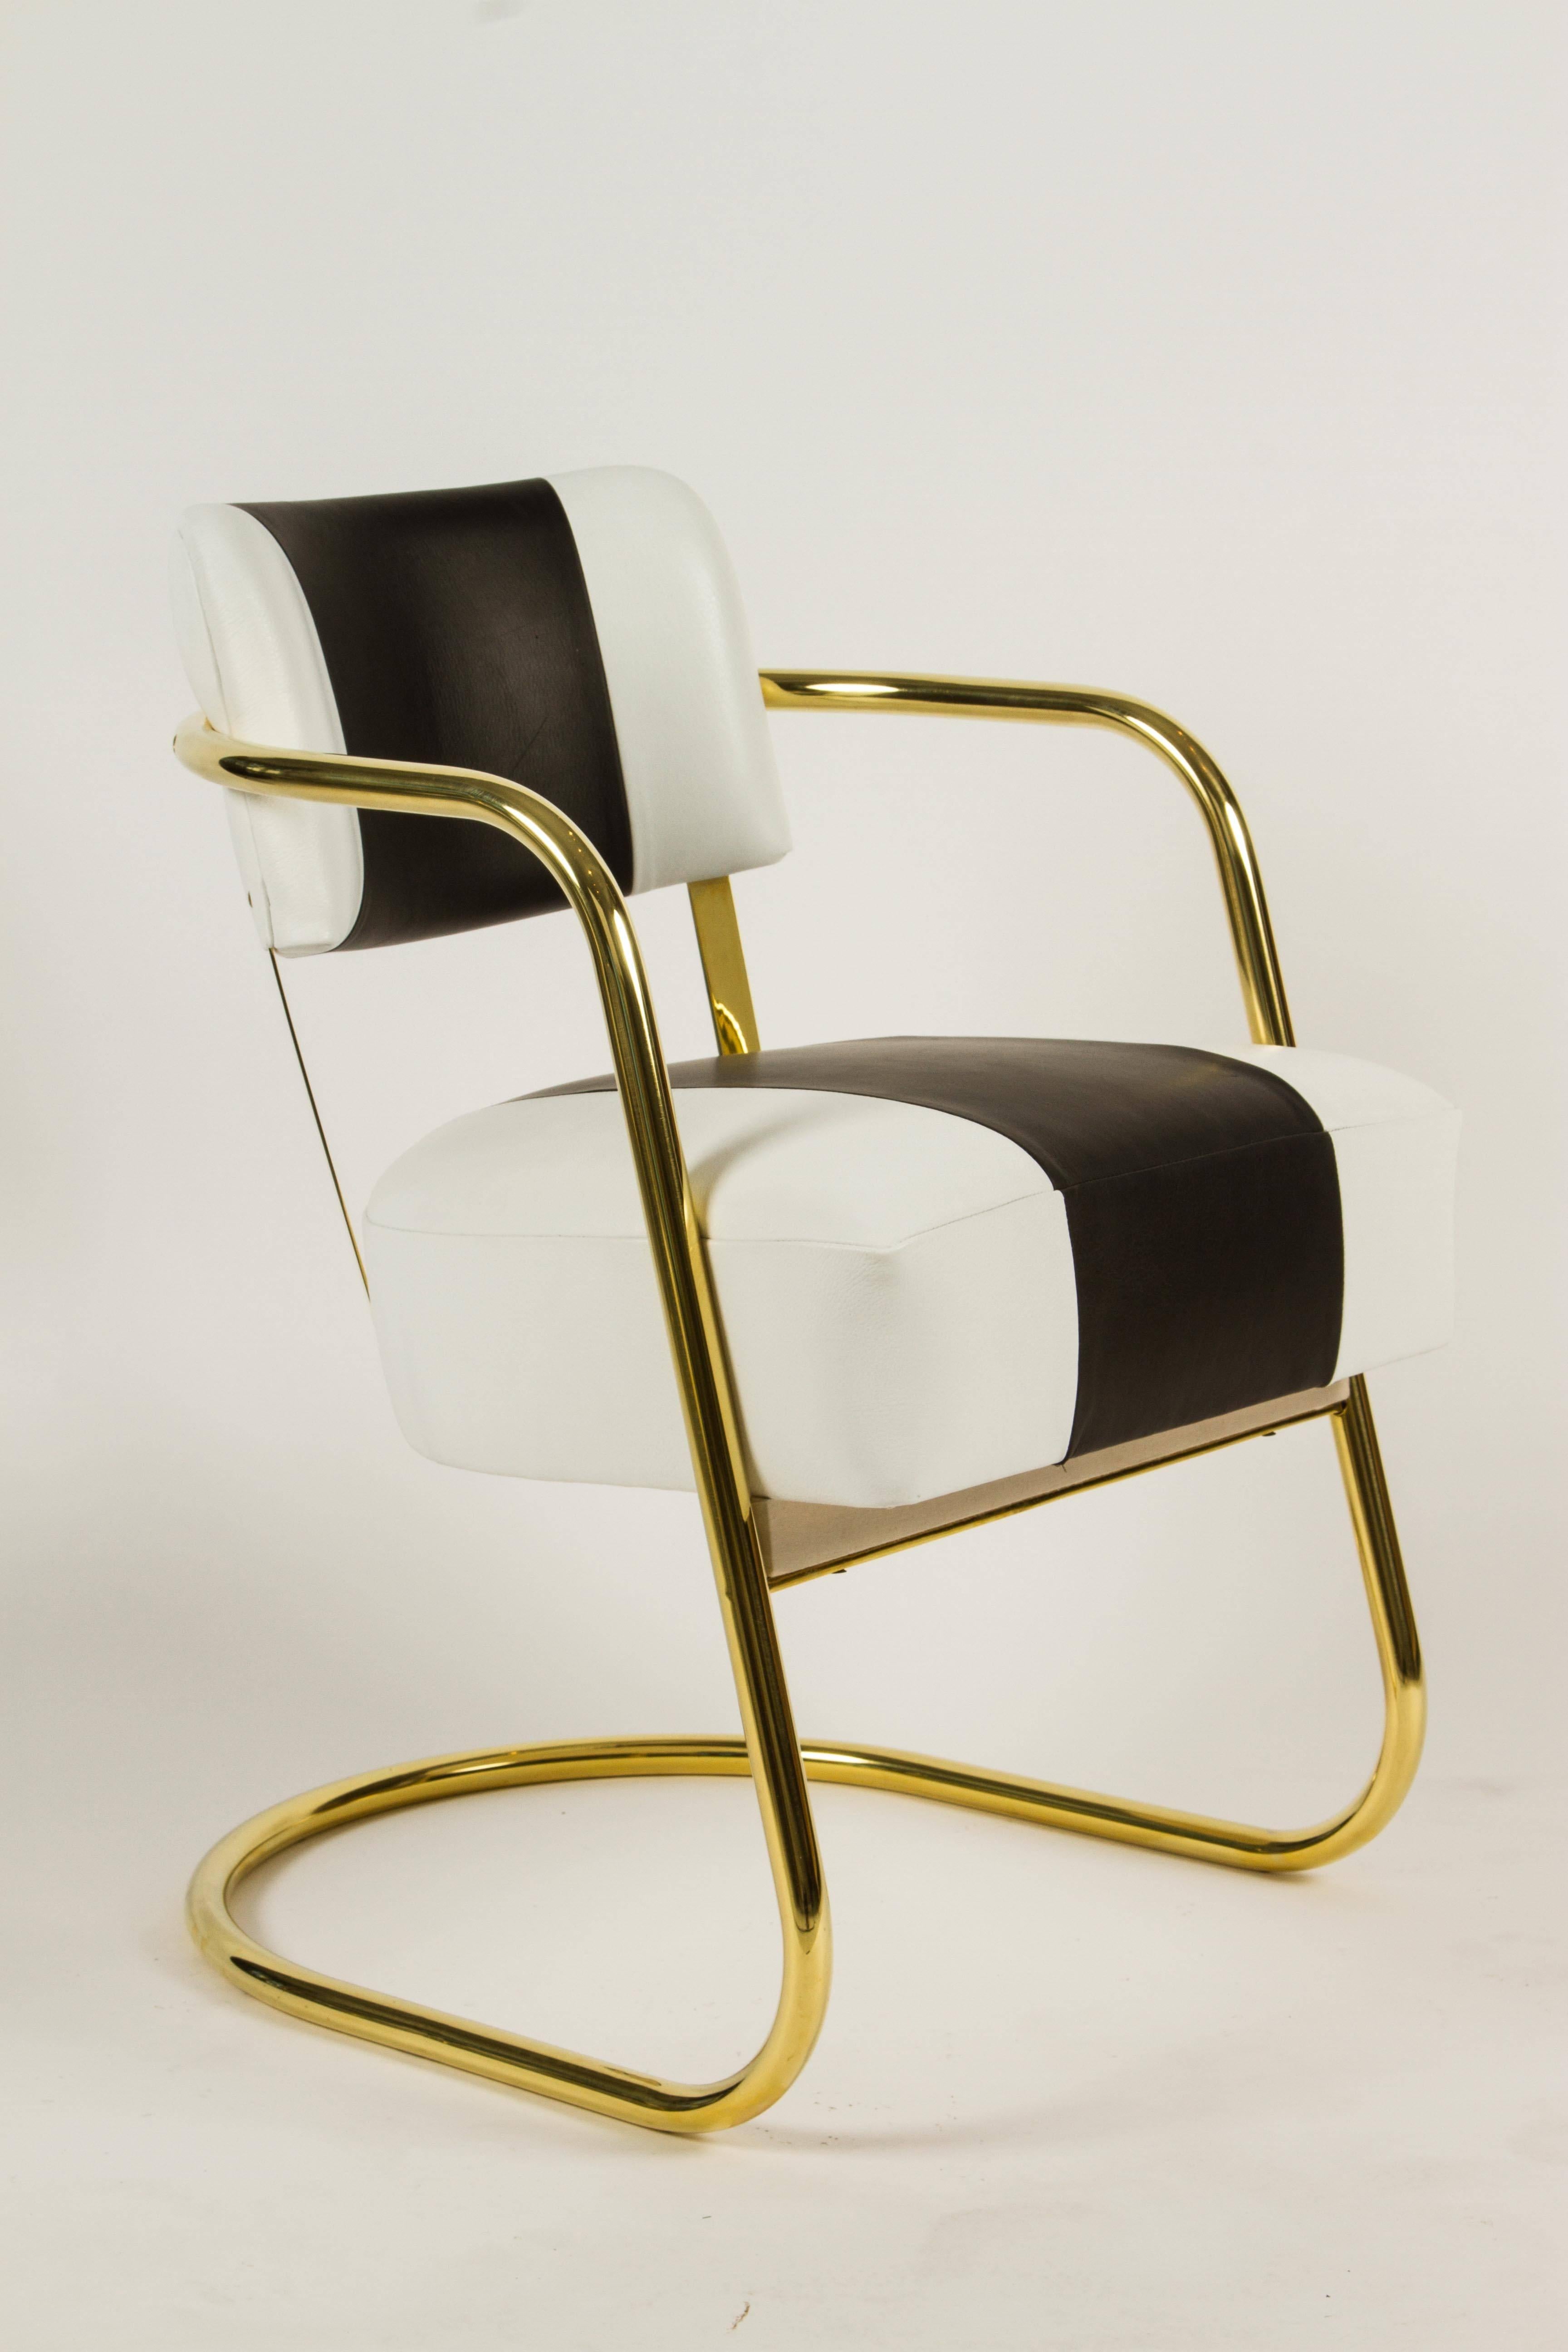 Plated Near Set of Six Art Deco Chairs in Brass and Leather